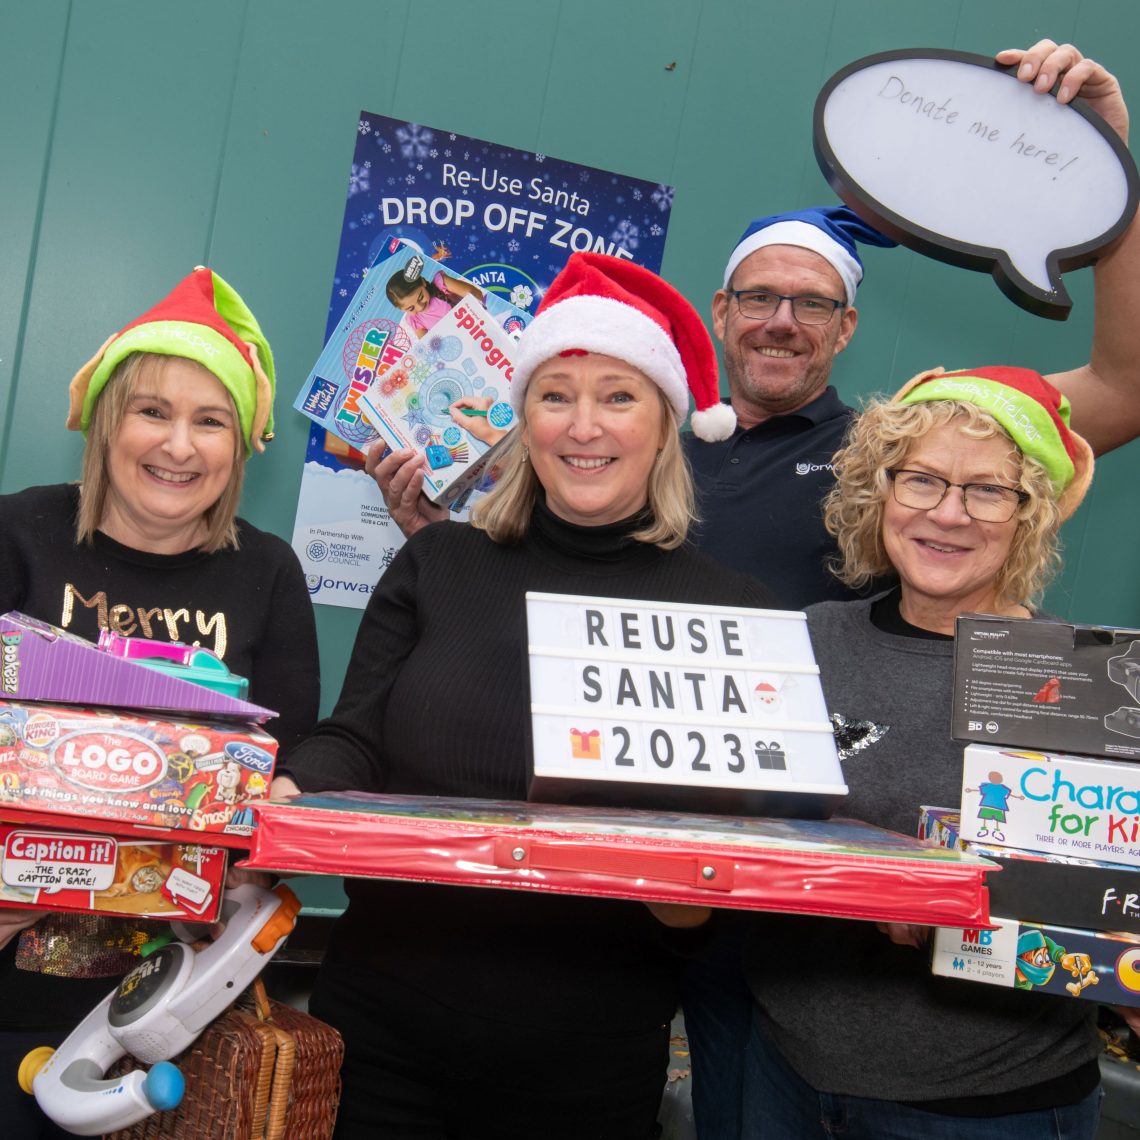 Festive recycling campaign to spread some Christmas cheer